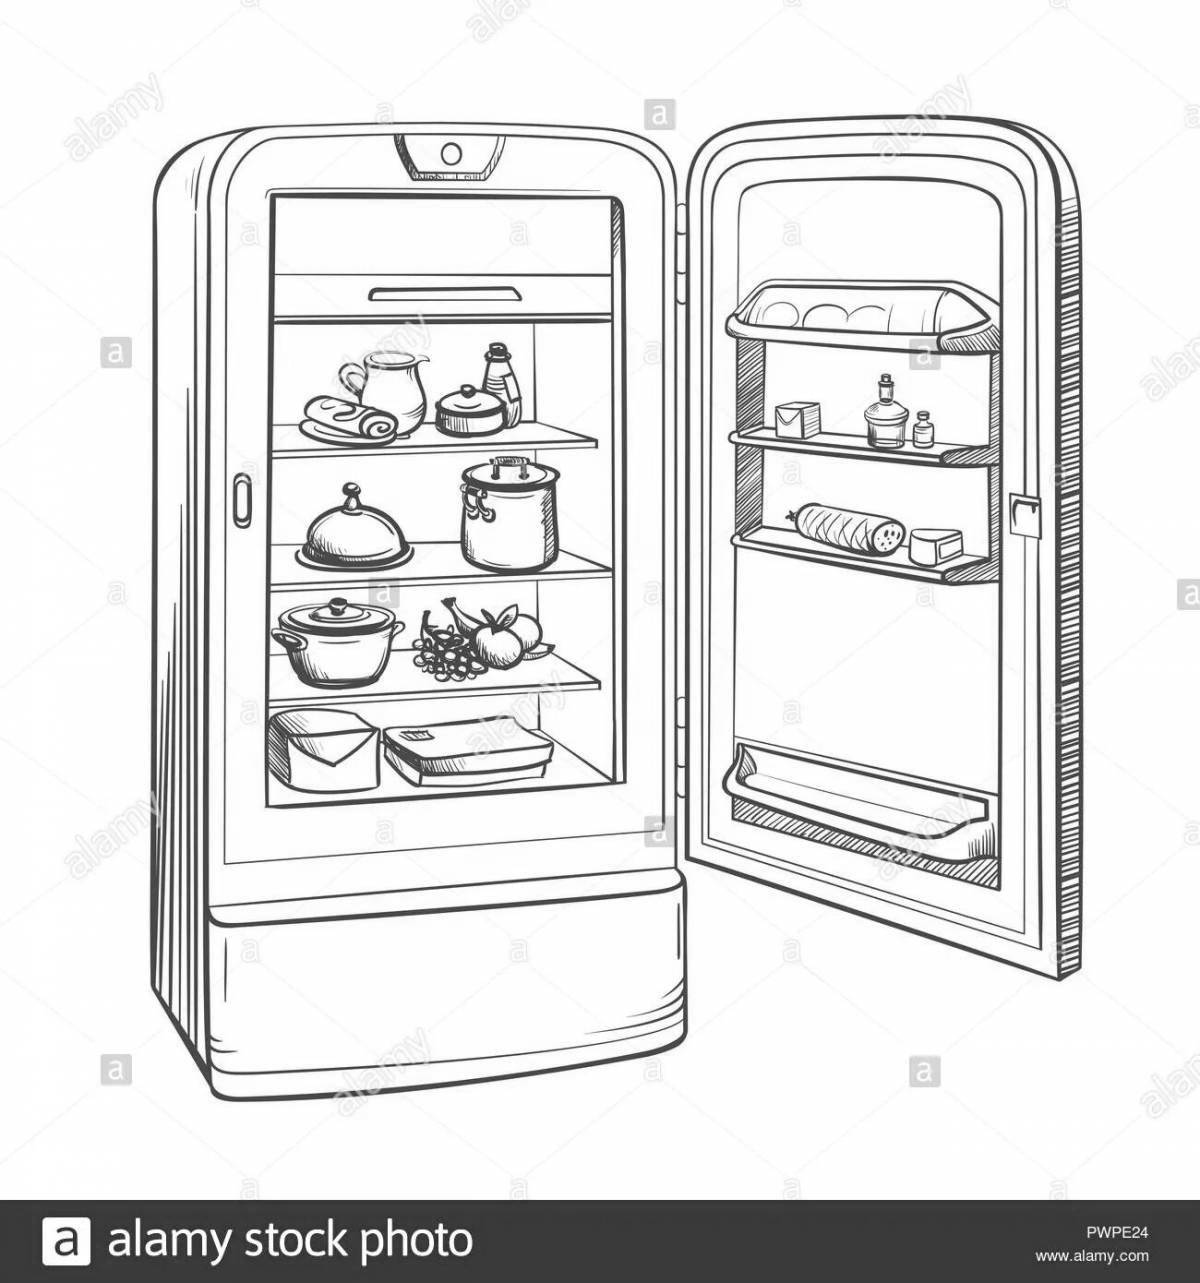 Wonderful refrigerator open coloring page